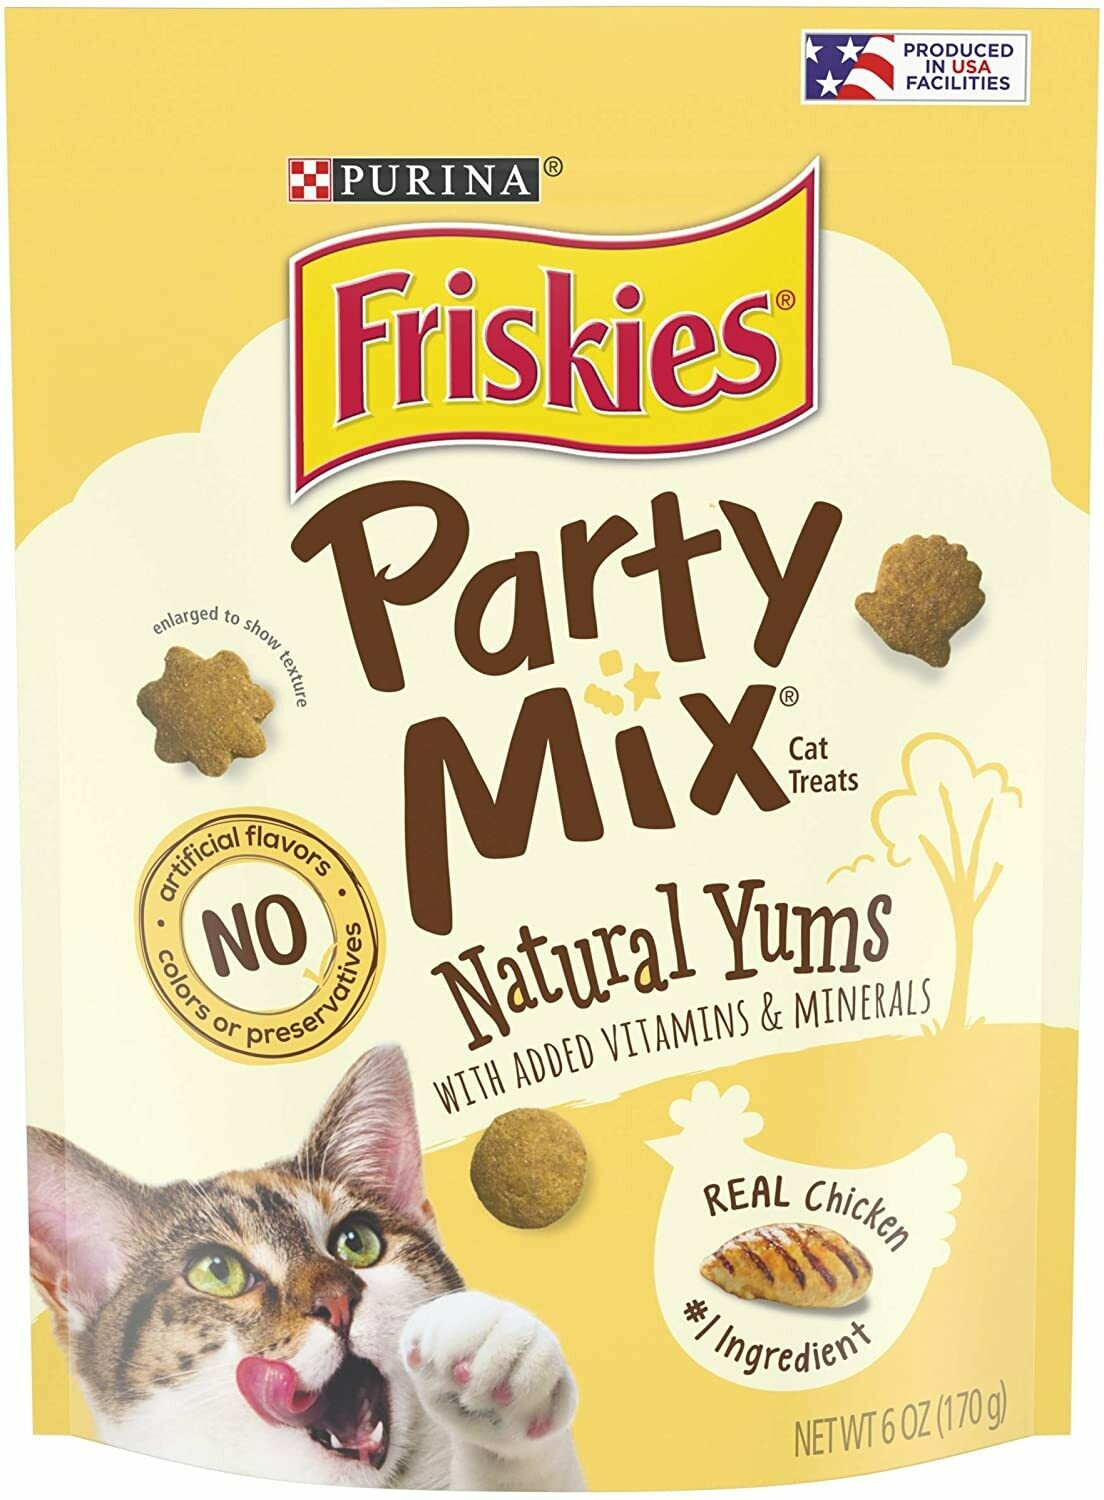 Purina Friskies Party Mix Natural Yums With Real Chicken Cat Treats 6oz